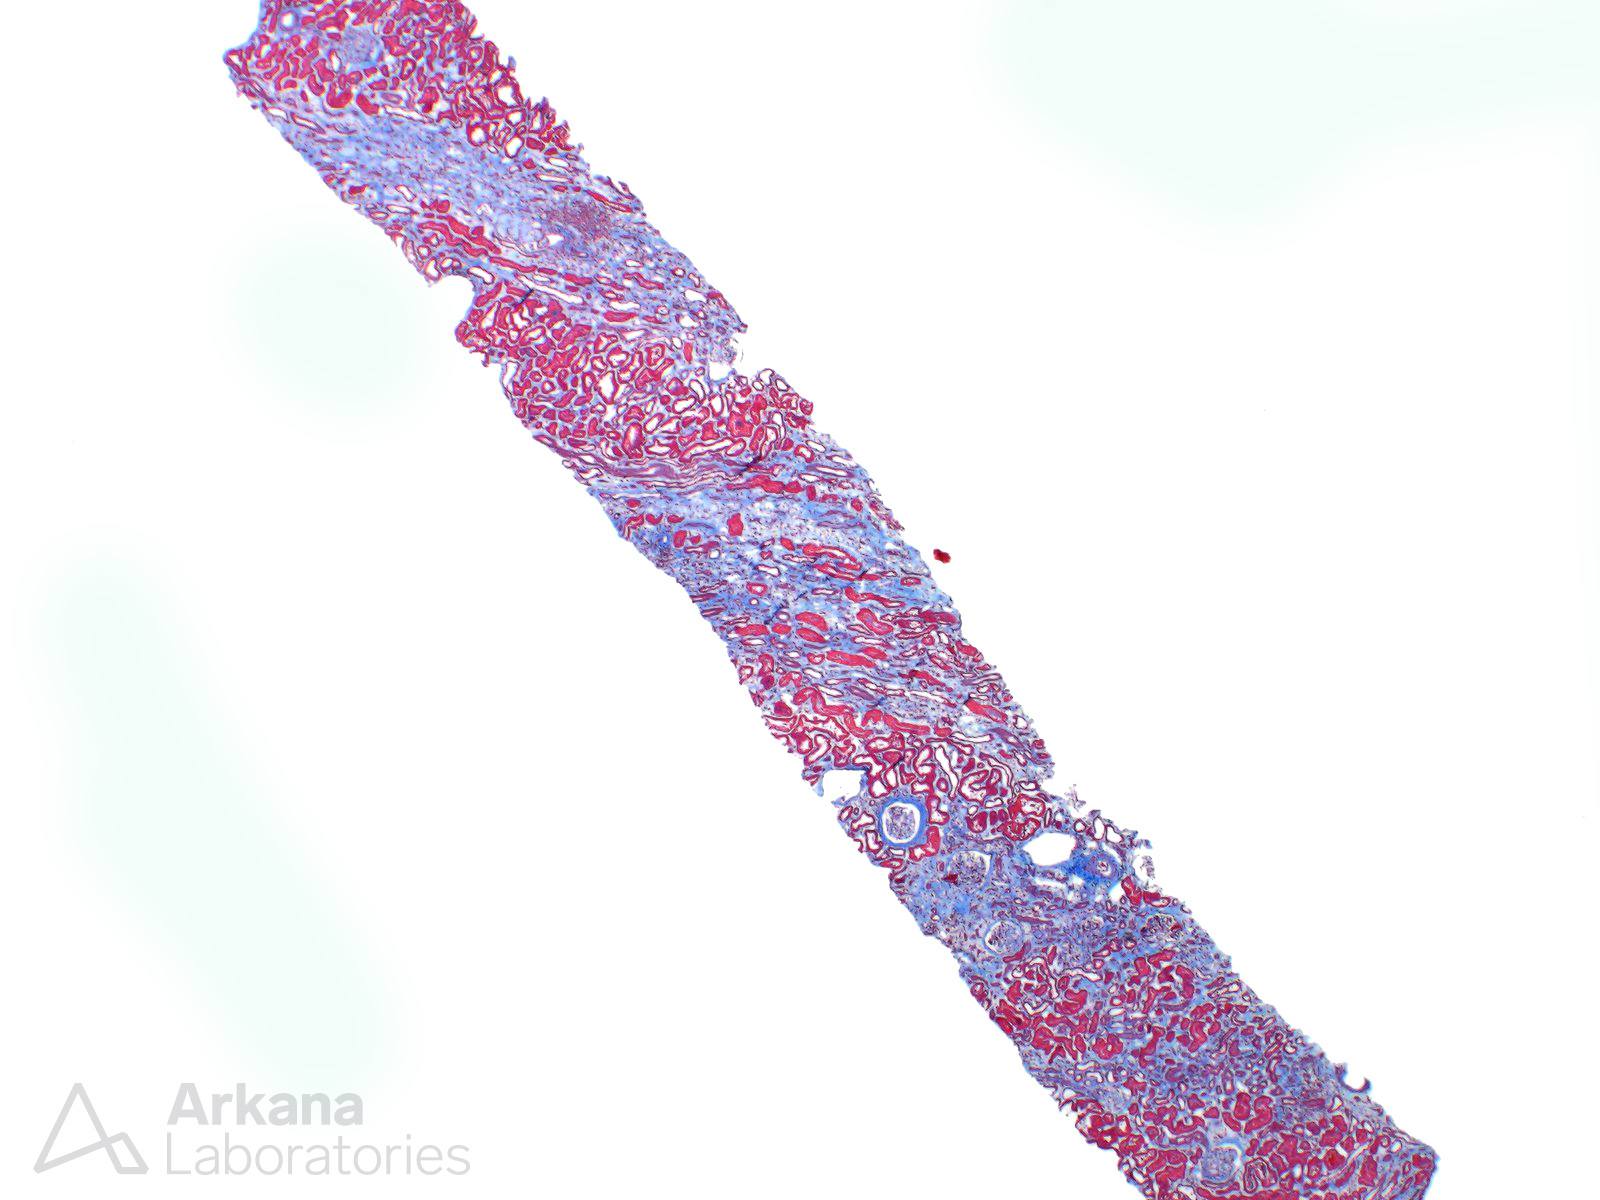 renal cortex from biopsy